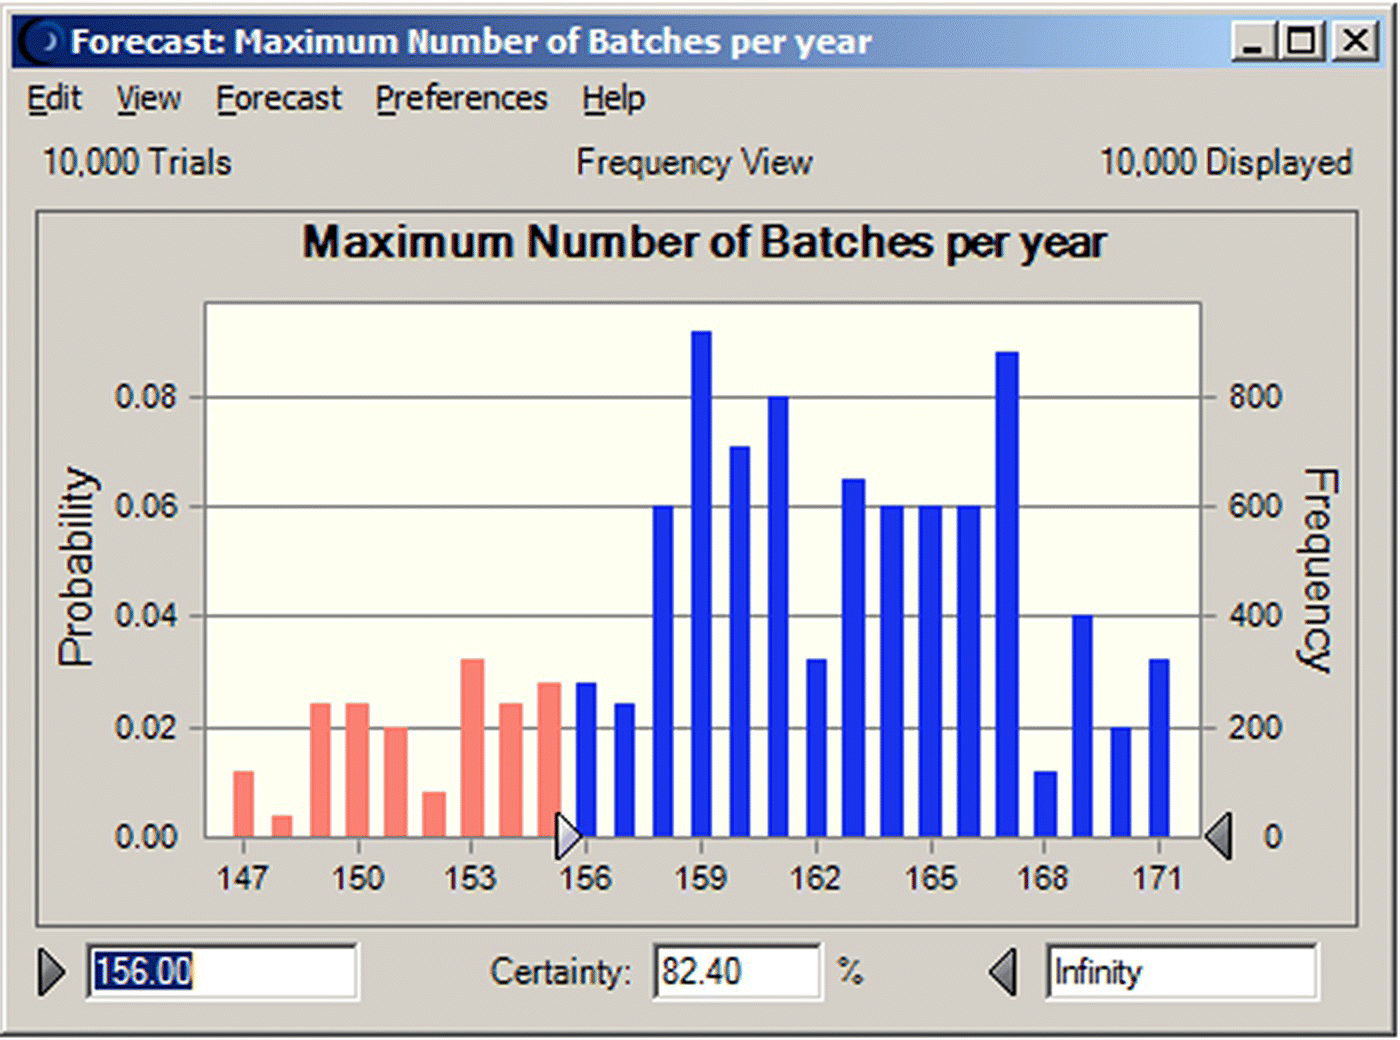 Screenshot illustrating graph of maximum number of batches per year depicting bars in fluctuating order with inward arrowheads pointing the dark shaded bars.